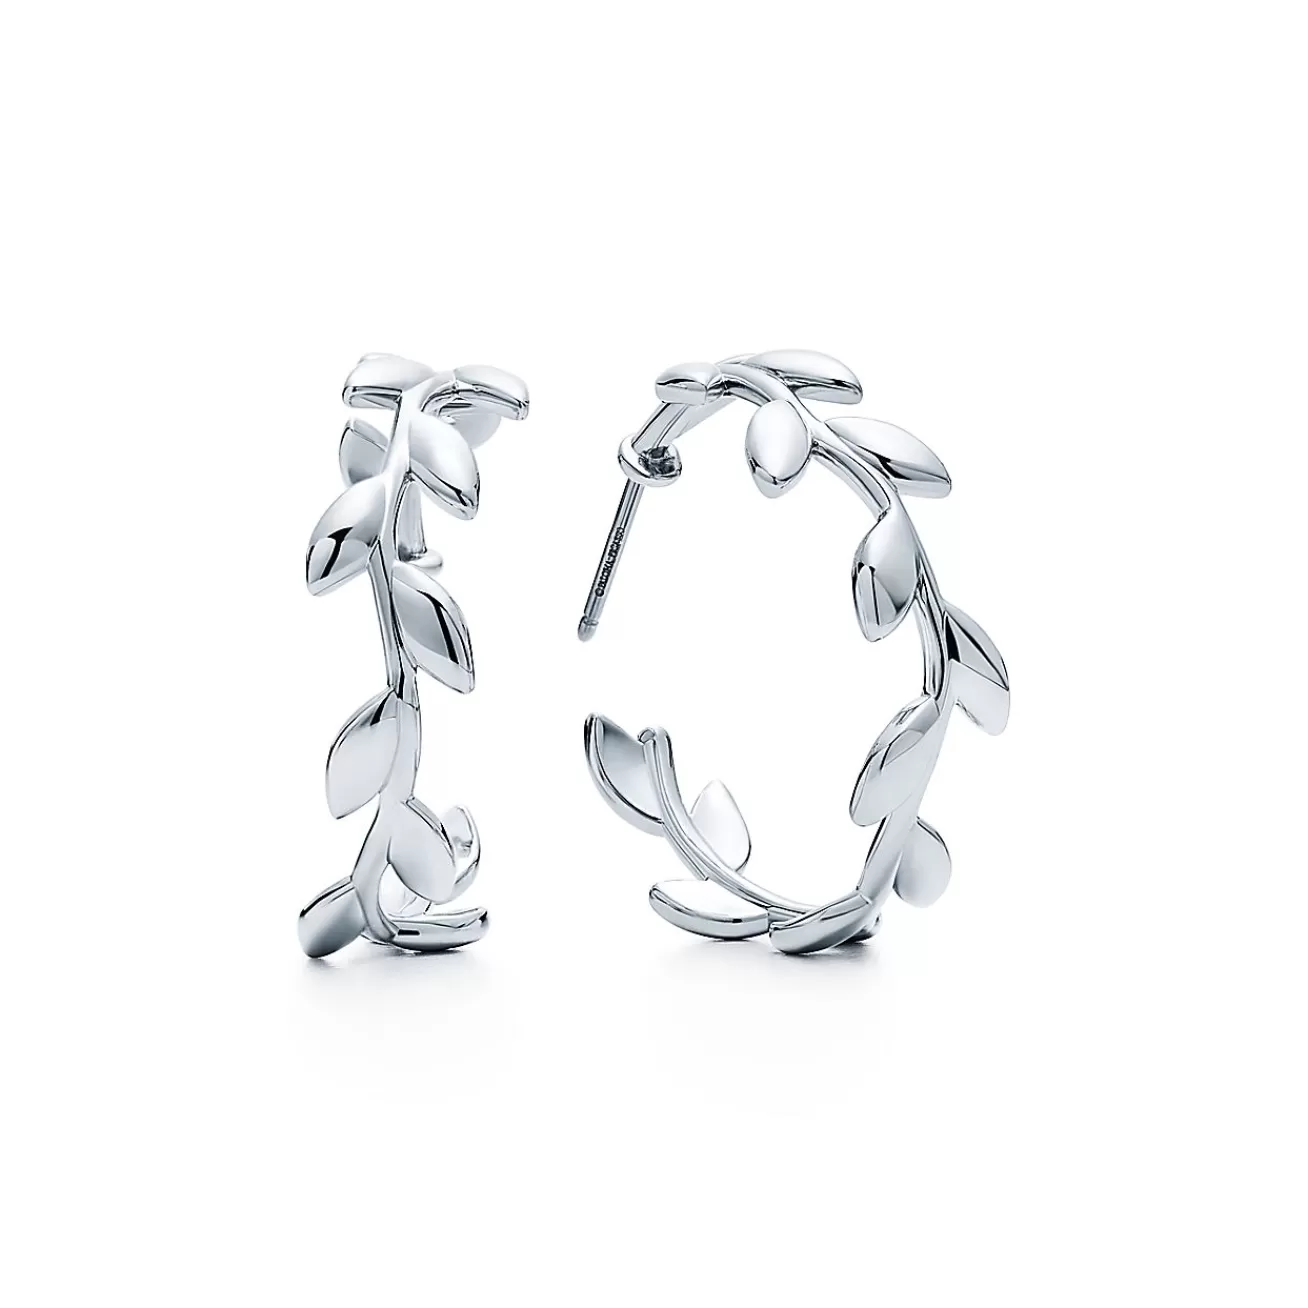 Tiffany & Co. Paloma Picasso® Olive Leaf hoop earrings in sterling silver. | ^ Earrings | Gifts for Her